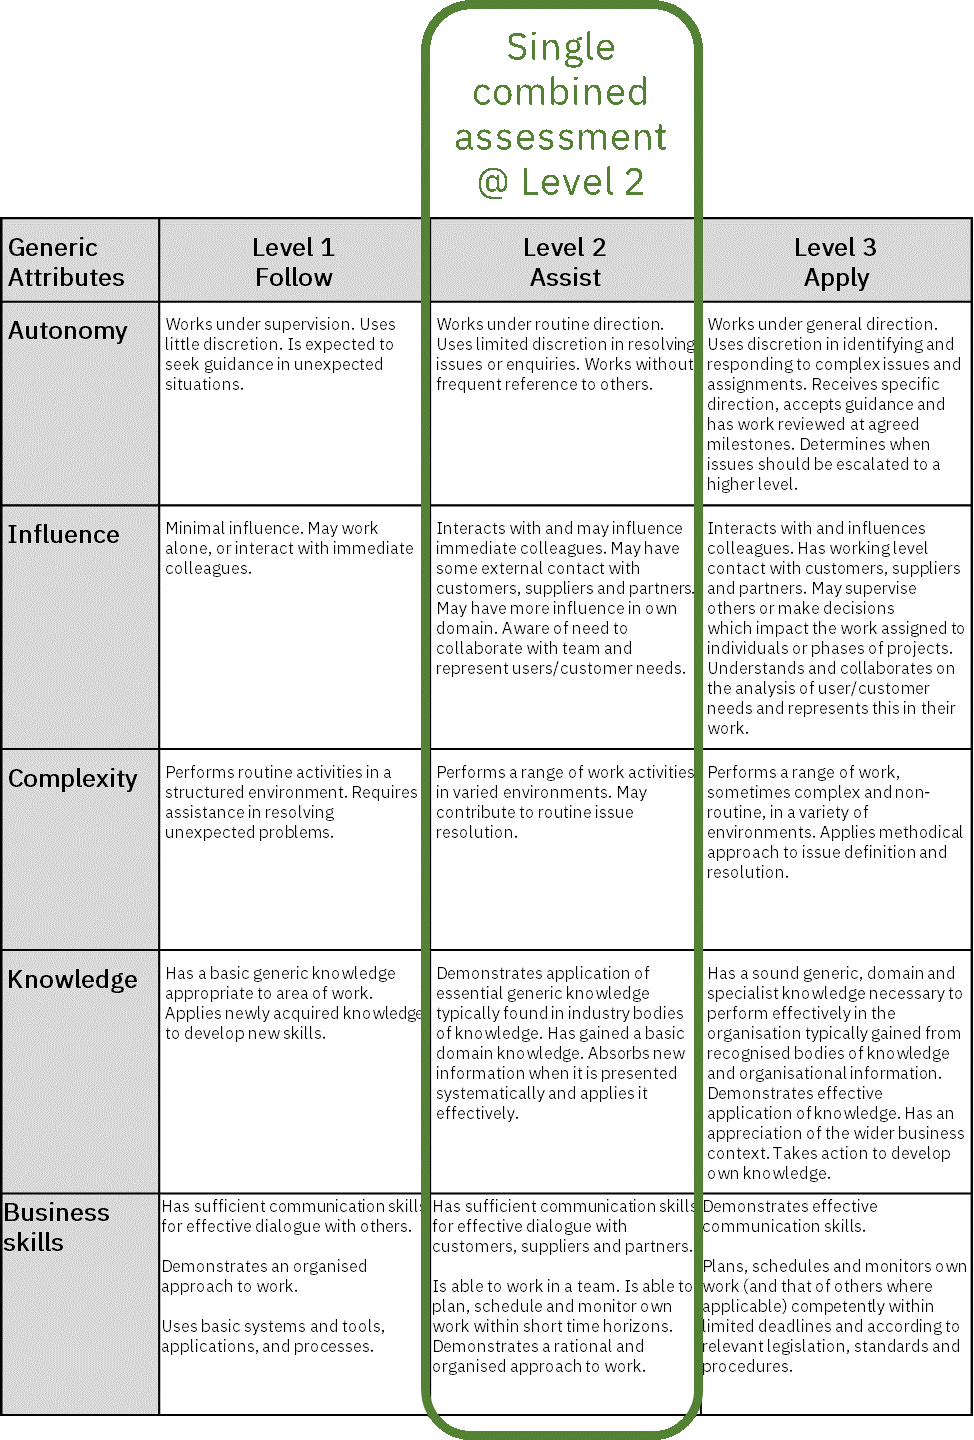 Figure 1 Single combined assessment.png